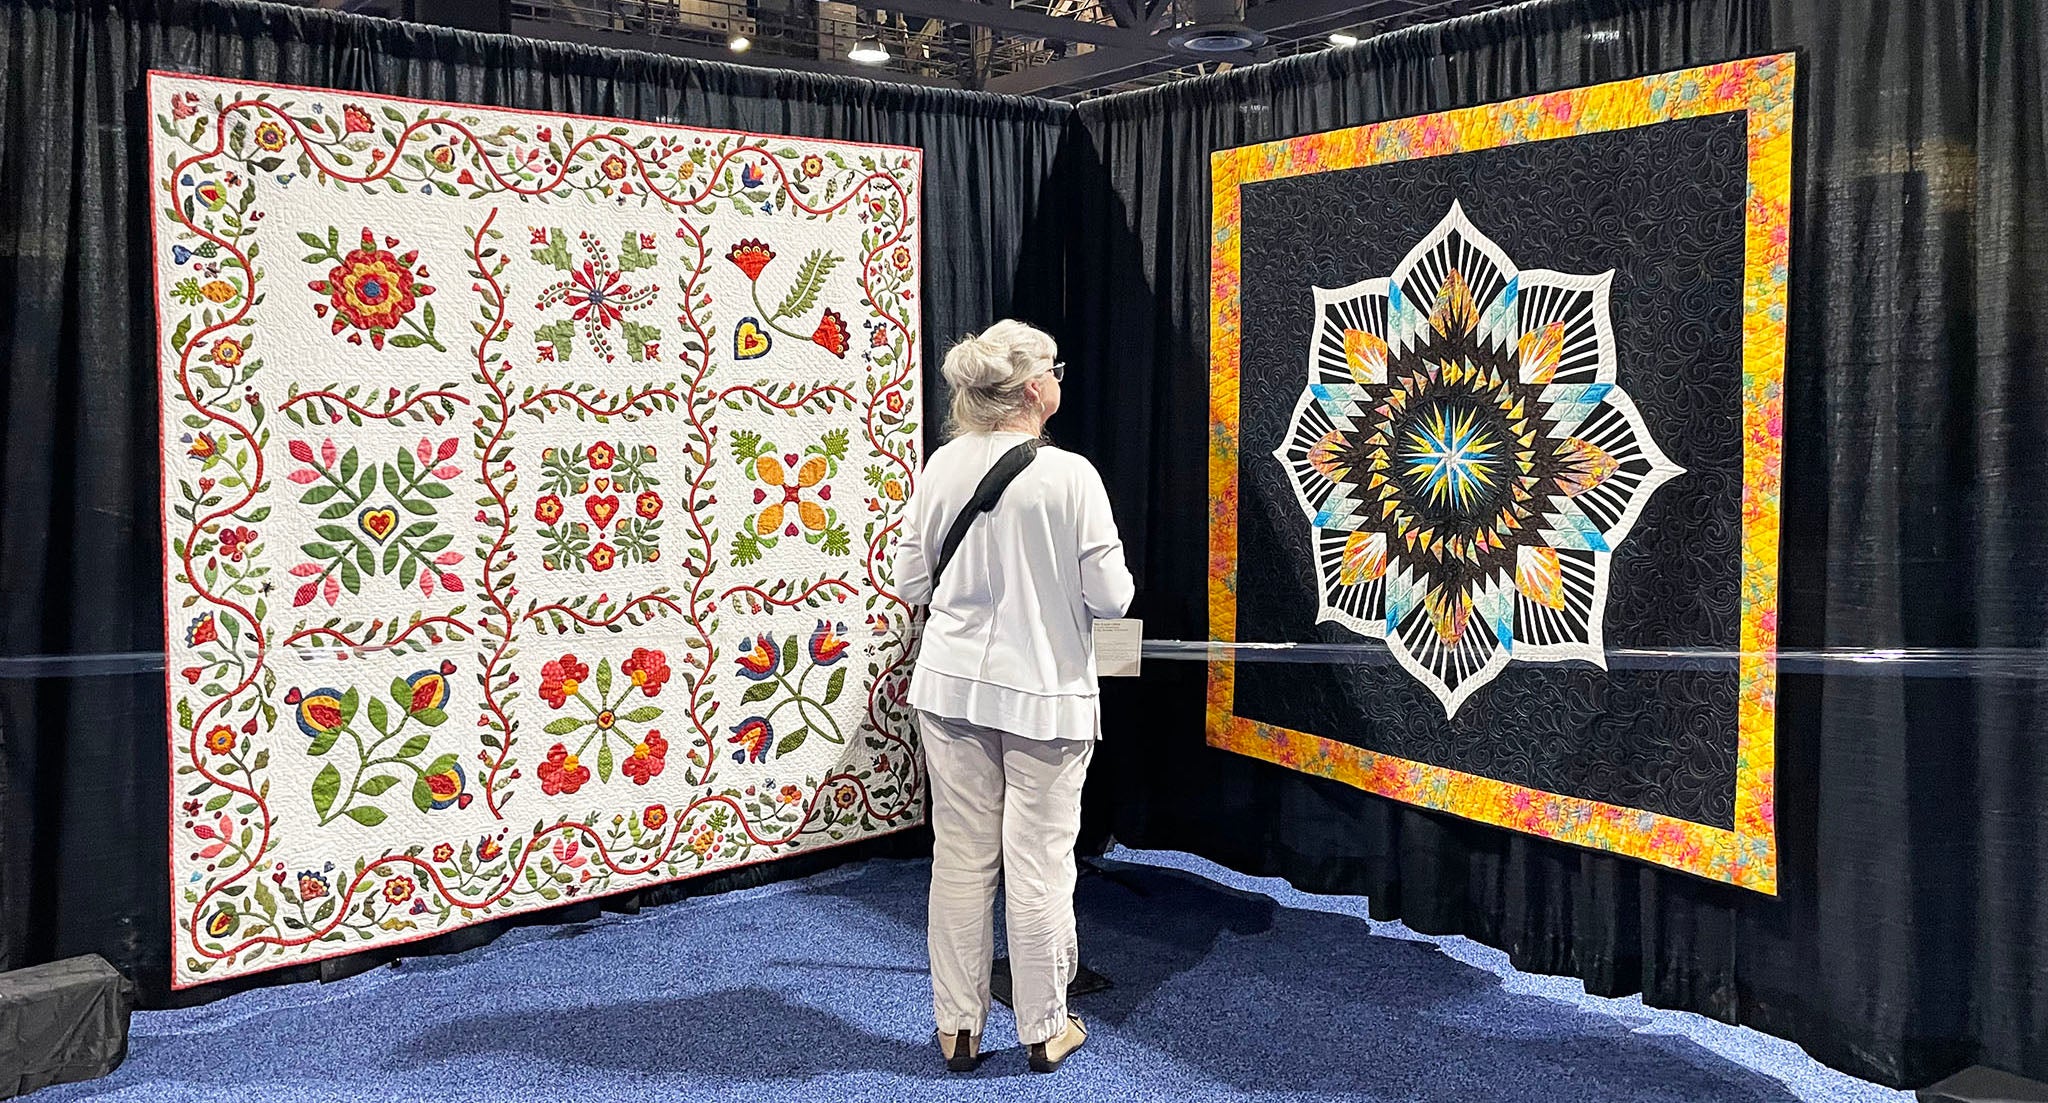 Long Beach Quilt Festival 2023 - Only One Bird by Patt Seitas(Left) - The Last One, by Lori Ramsey, quilted by Sandy Carreon(Right) - Photo By Victoria Stone